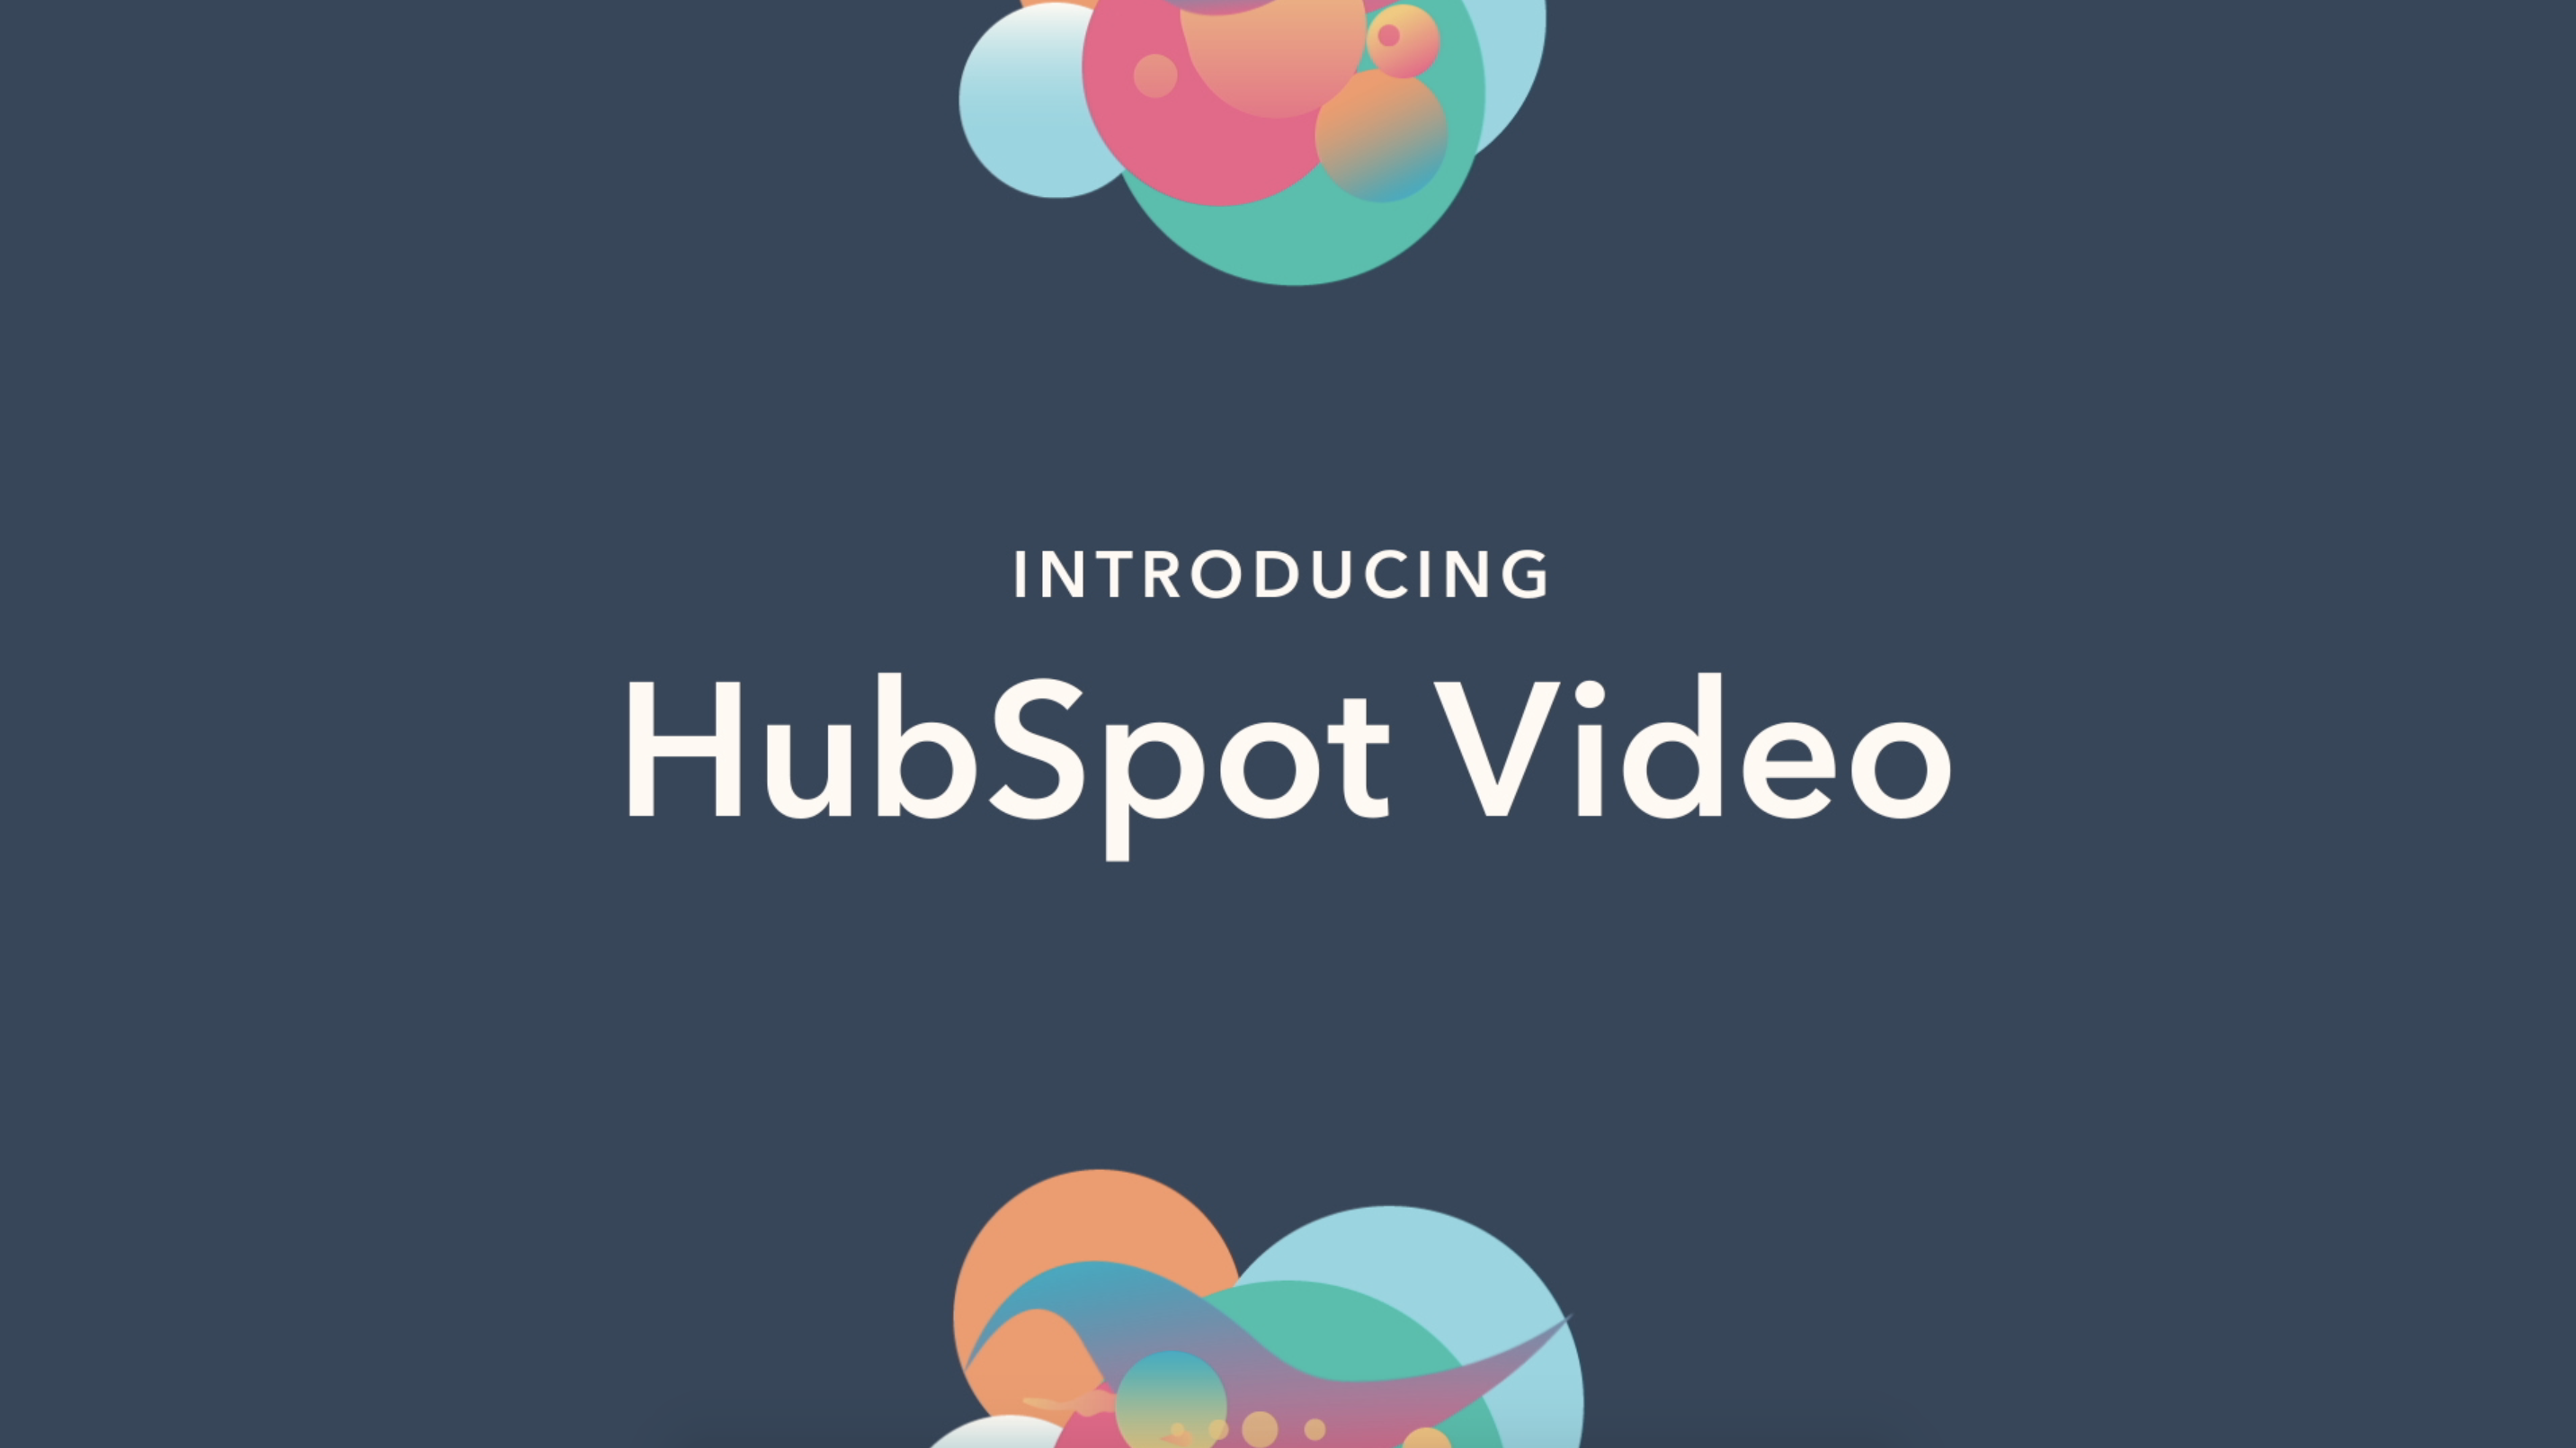 An introduction to hubspot video